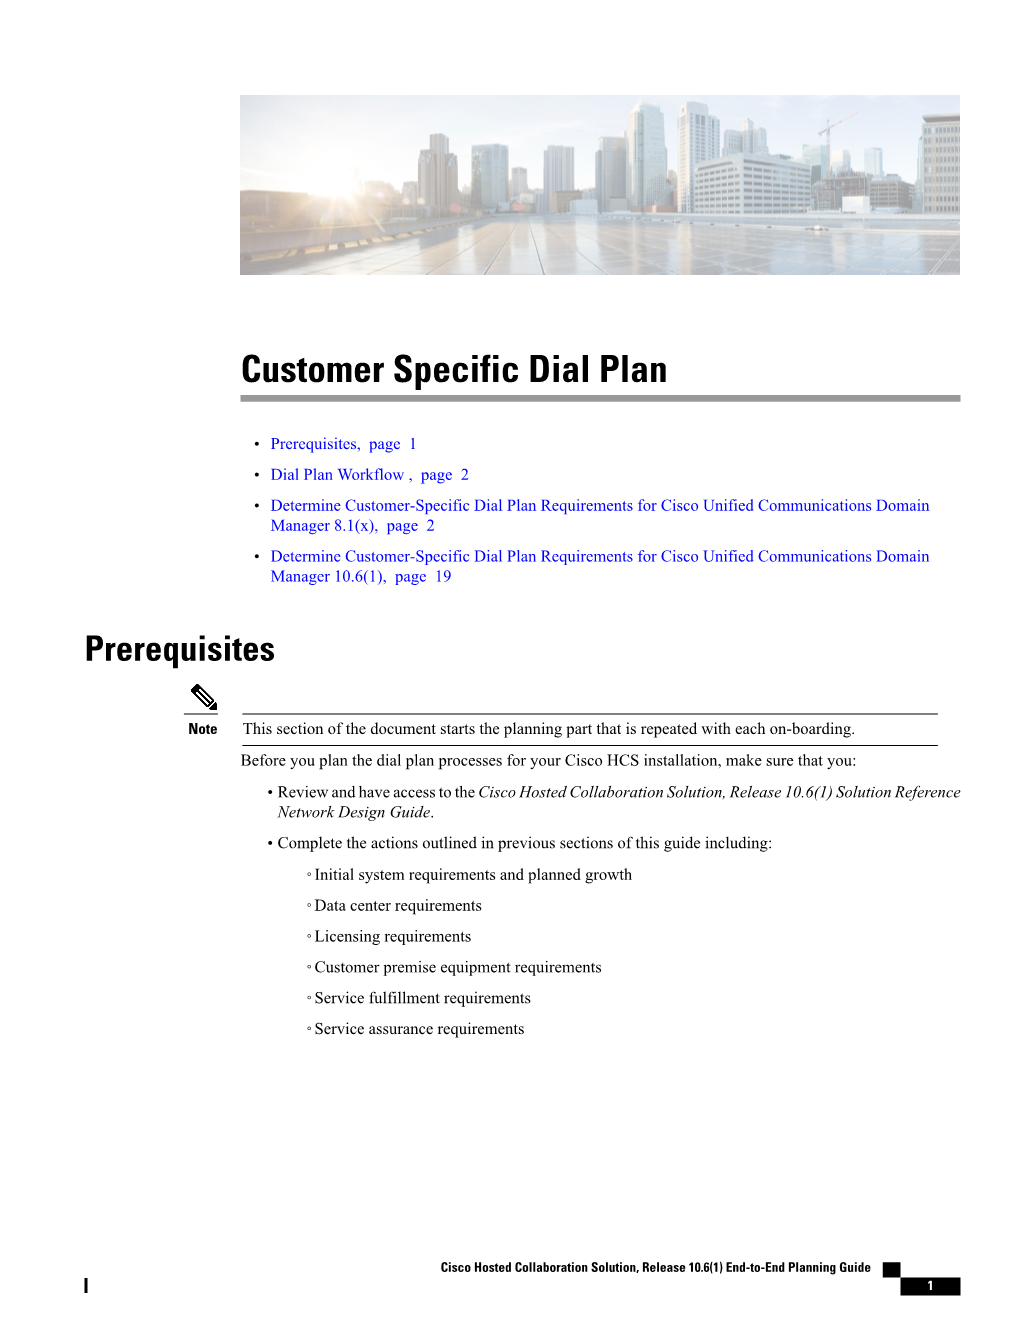 Customer Specific Dial Plan